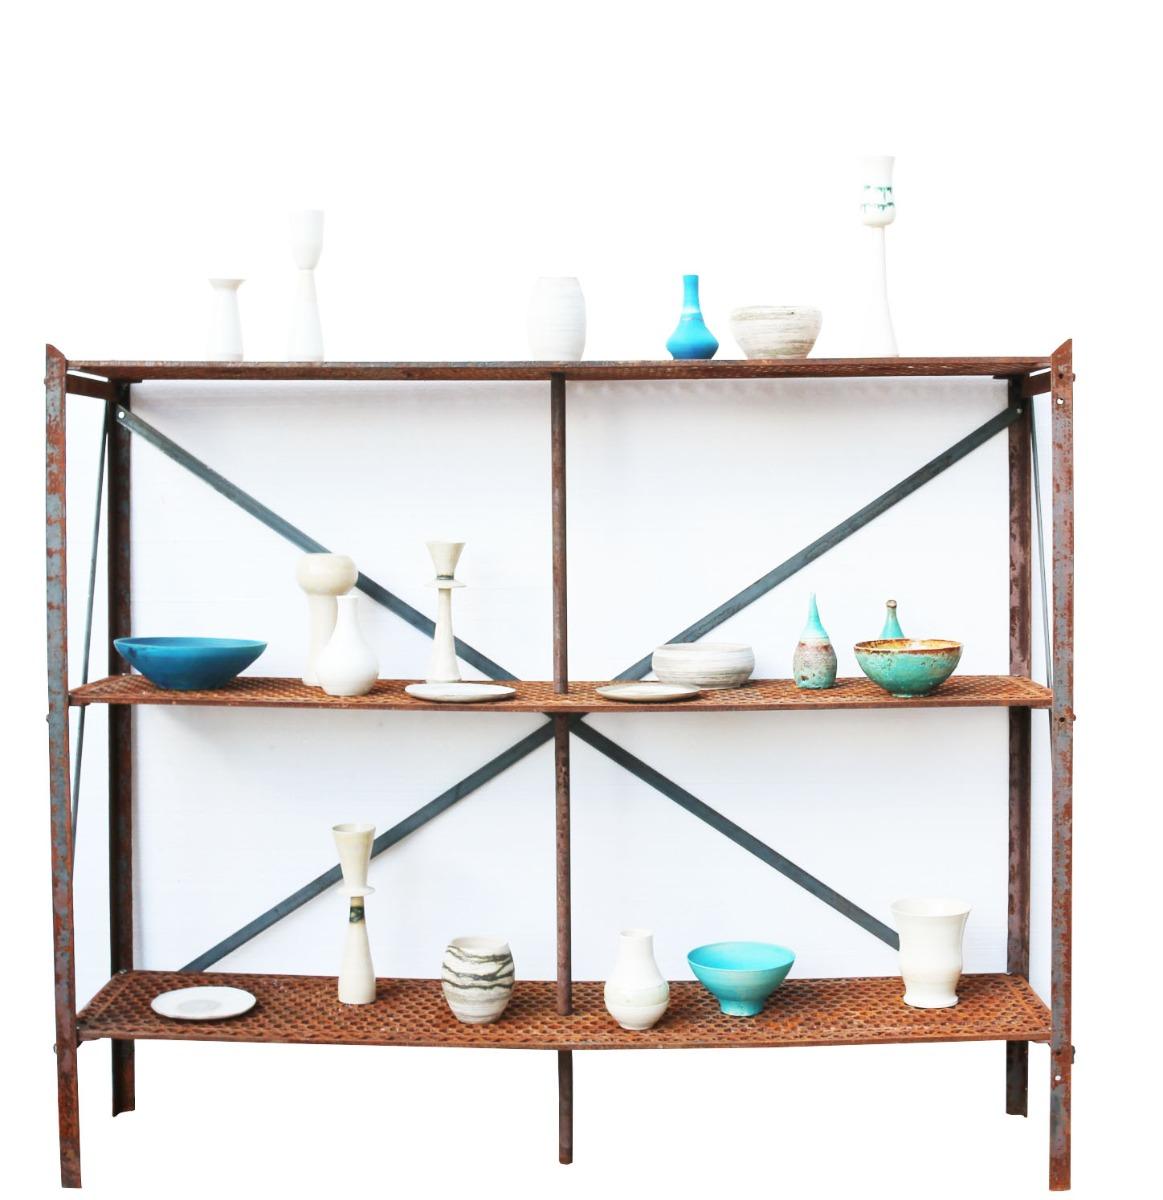 We have a large quantity of these reclaimed shelving units. These were reclaimed from a cotton mill in Yorkshire and can be bolted together to make long runs.

There are 23 available as pictured

Each unit will come disassembled. 11 x components